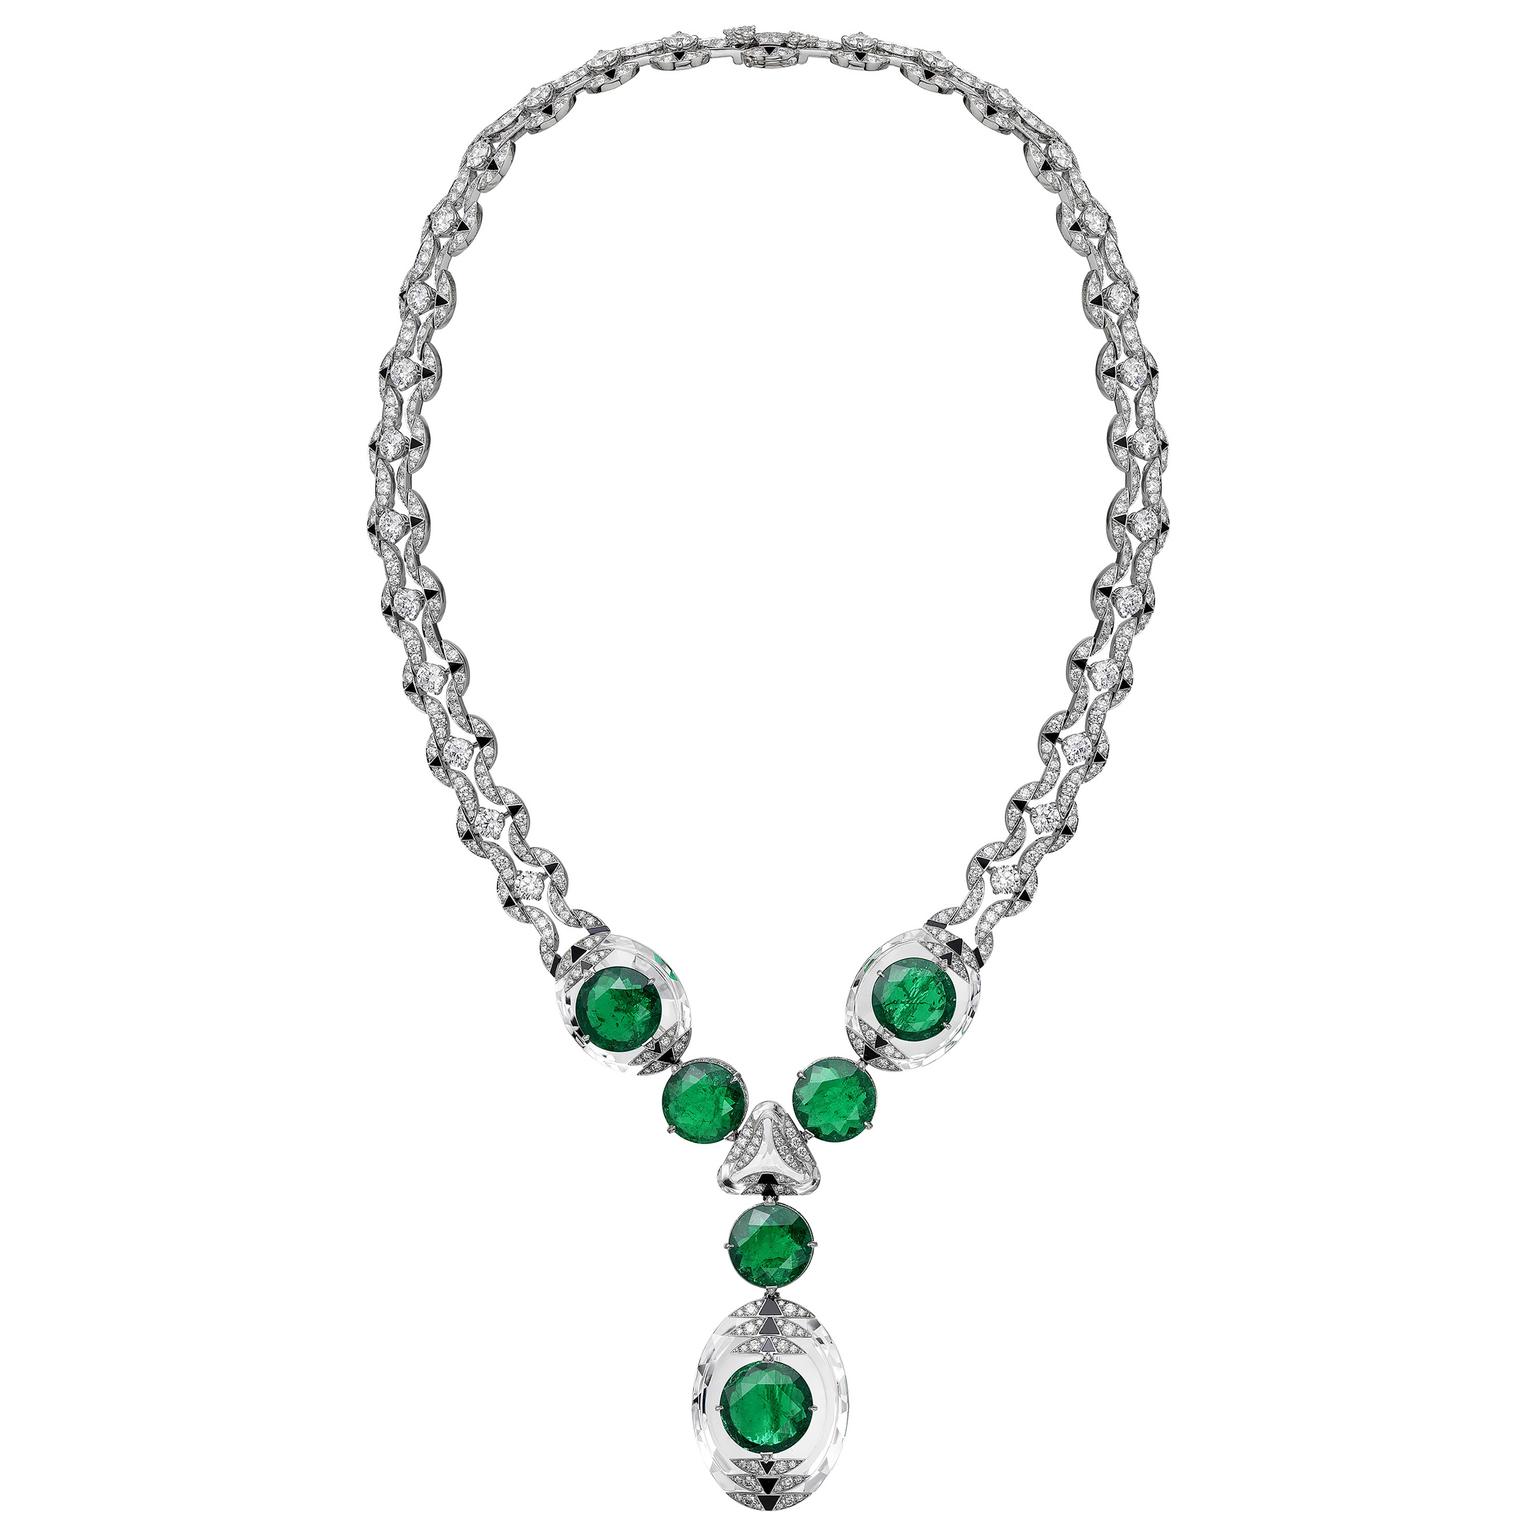 Emerald and rock crystal necklace from Cartier